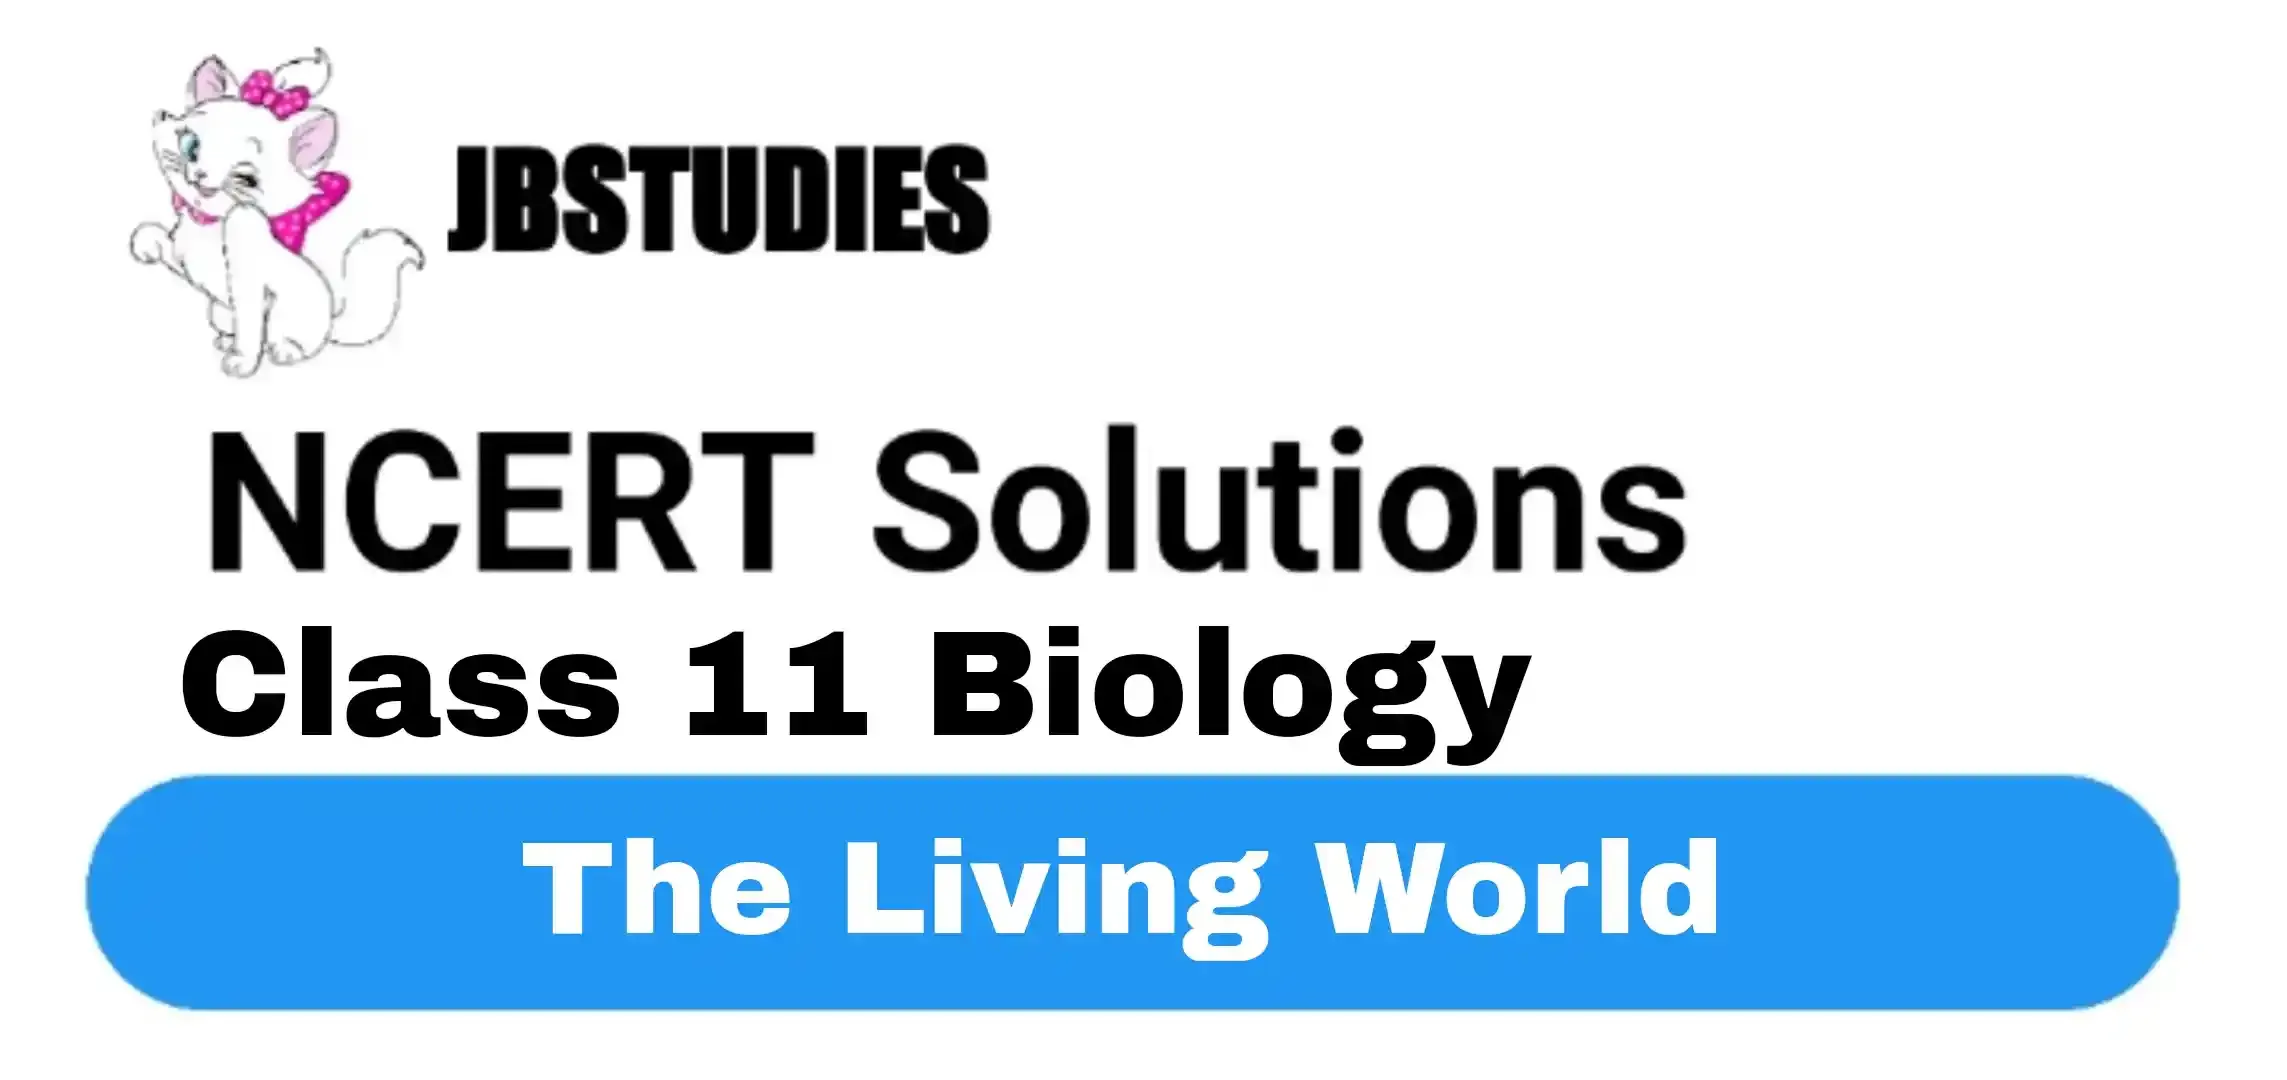 Solutions Class 11 Biology Chapter -1 (The Living World)